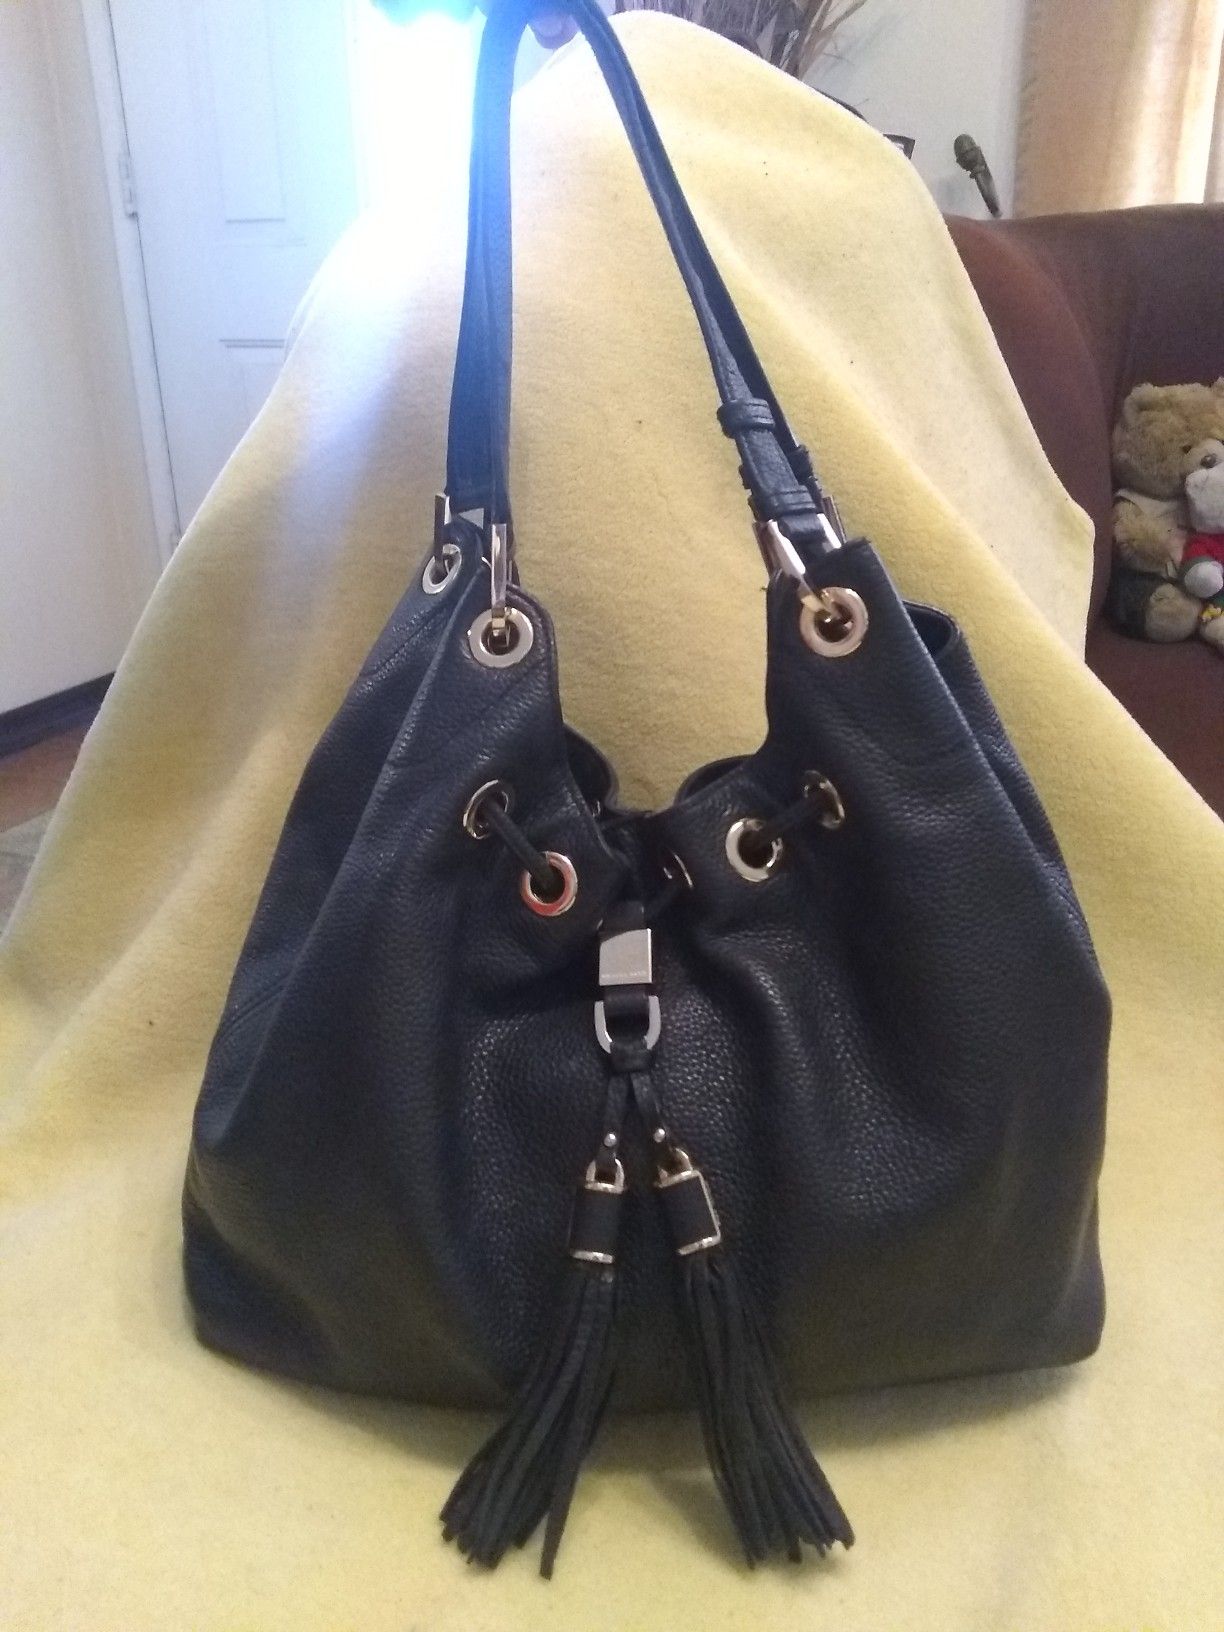 Michael Kors authentic leather perfect cond inside and outside firm price hablo español